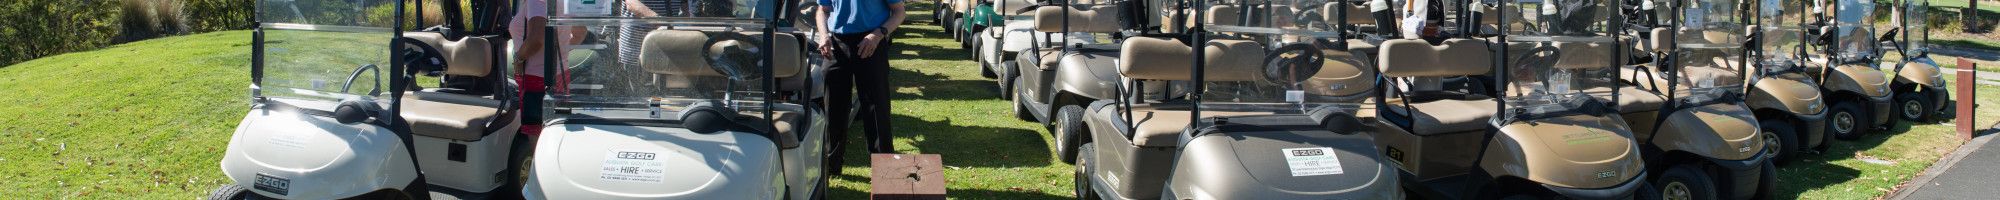 a line of golf scooters